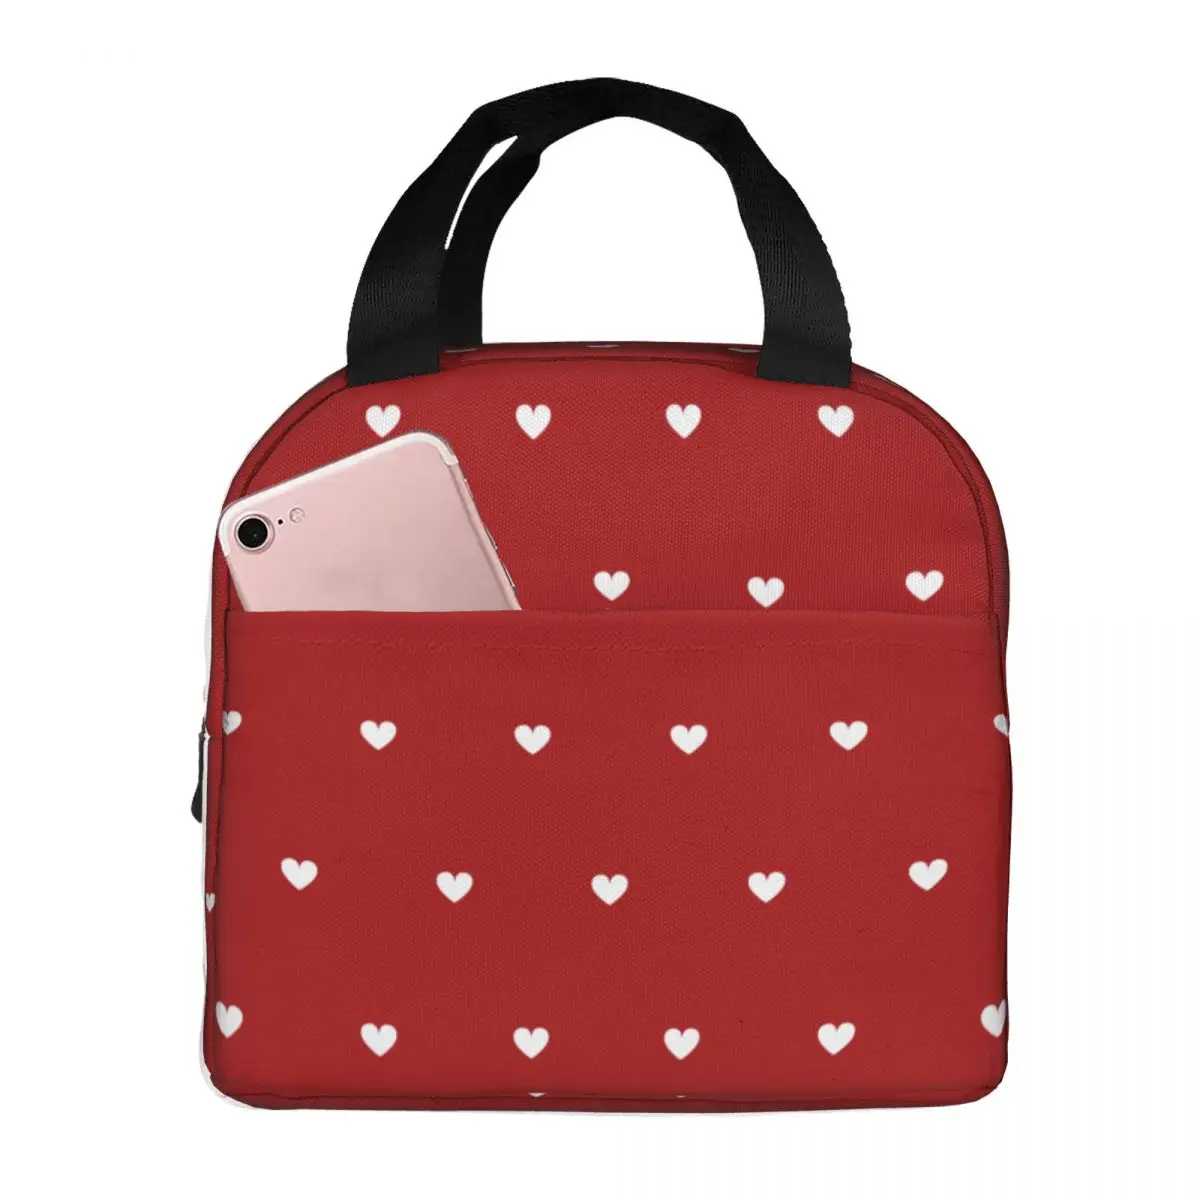 White Hearts Pattern On Red Background Lunch Bags Portable Insulated Cooler Thermal Picnic Travel Lunch Box for Women Children